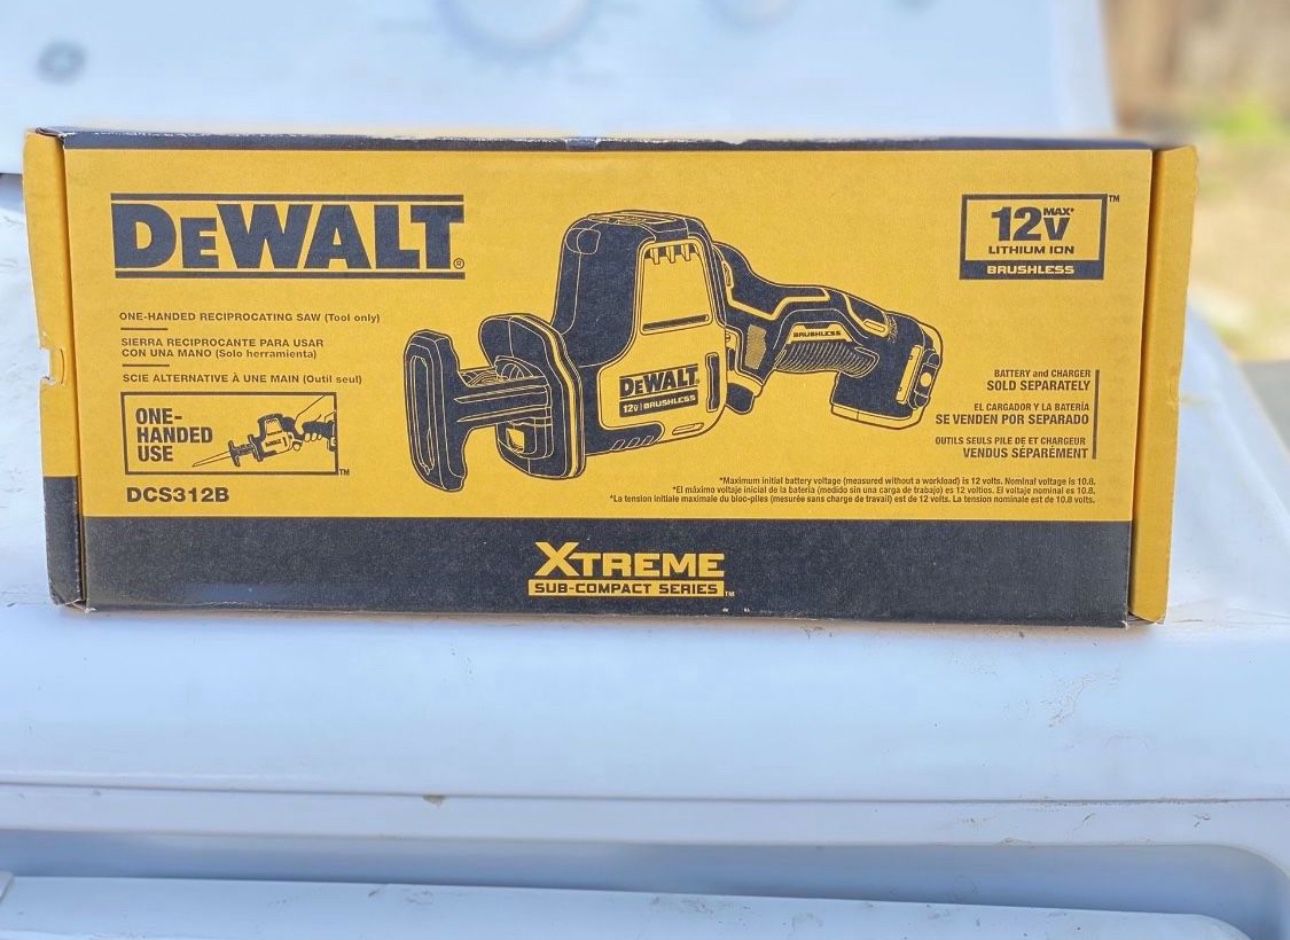 Dewalt XTREME 12V MAX Brushless One-Handed Cordless Reciprocating Saw  DCS312B for Sale in Bakersfield, CA OfferUp